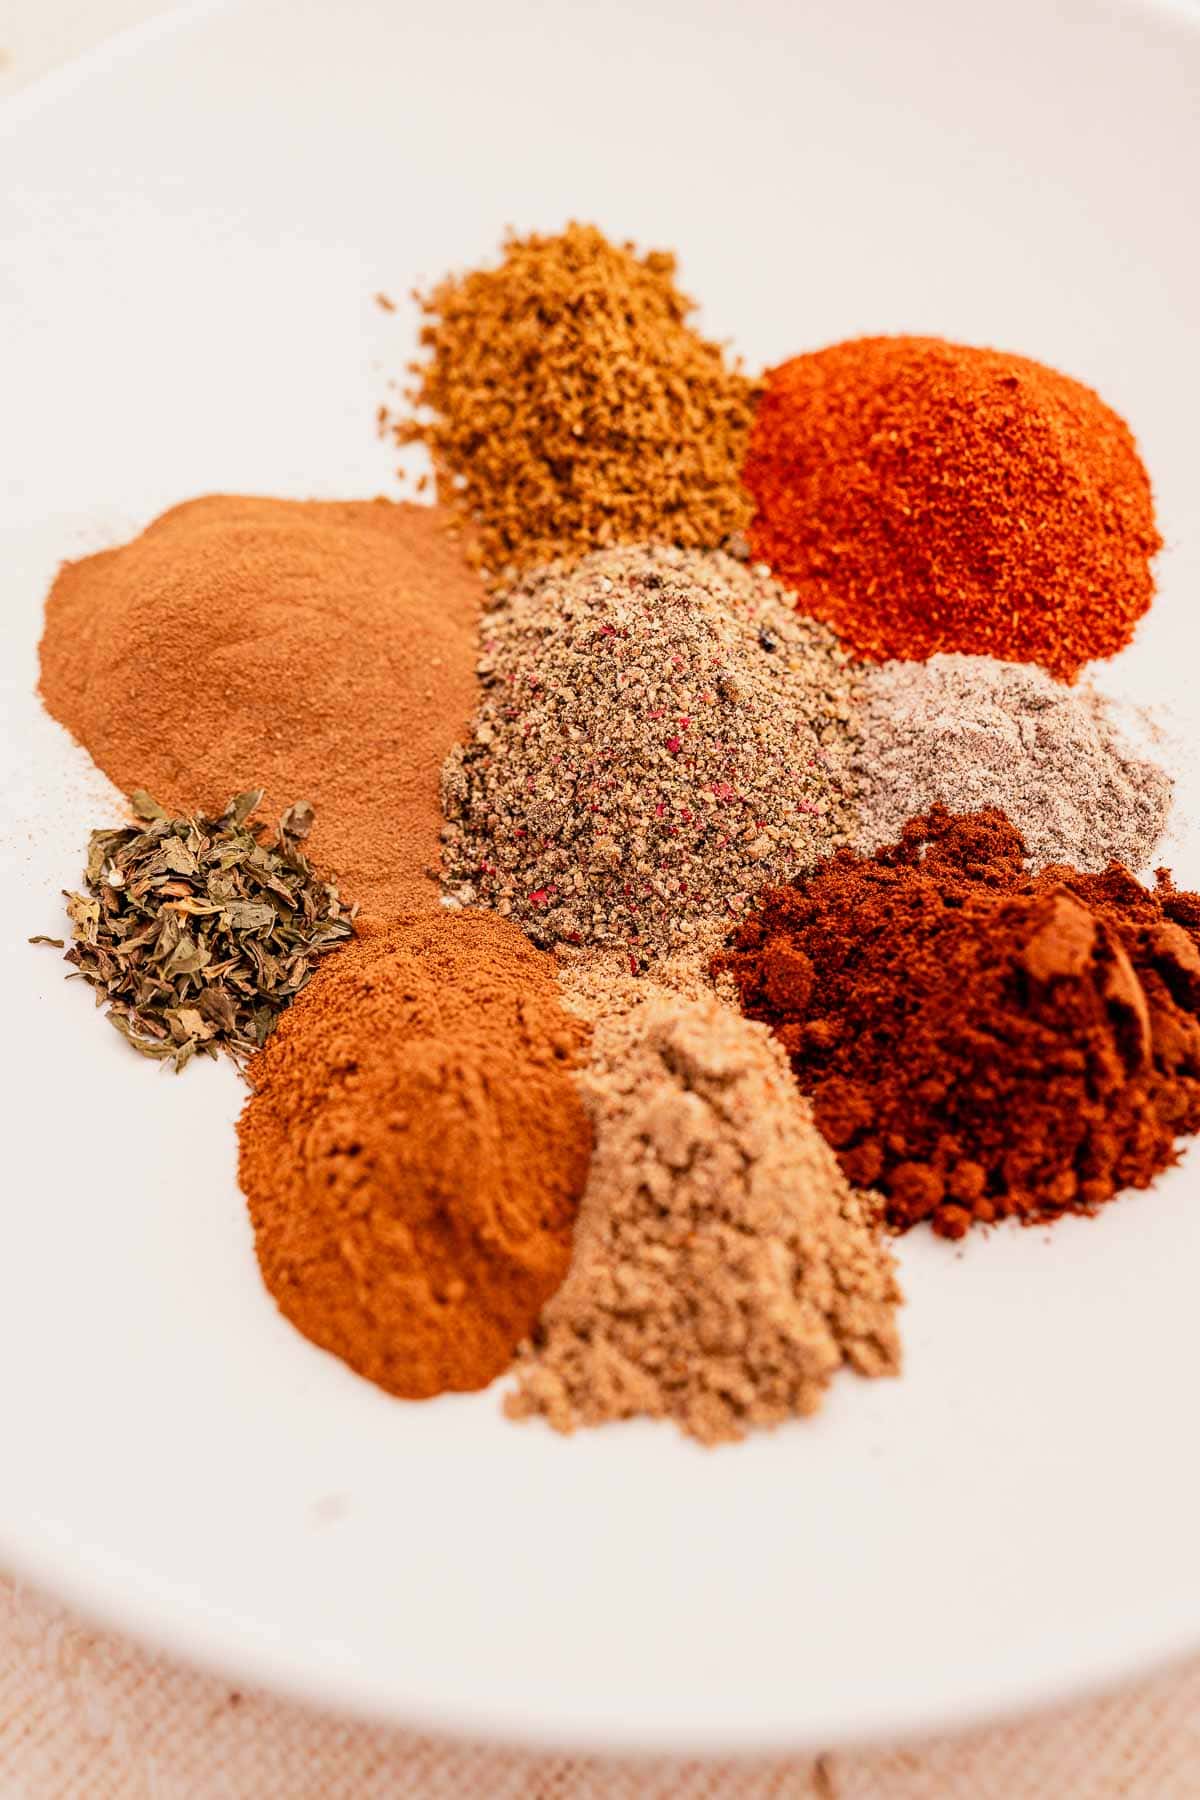 Baharat spices on a white plate.